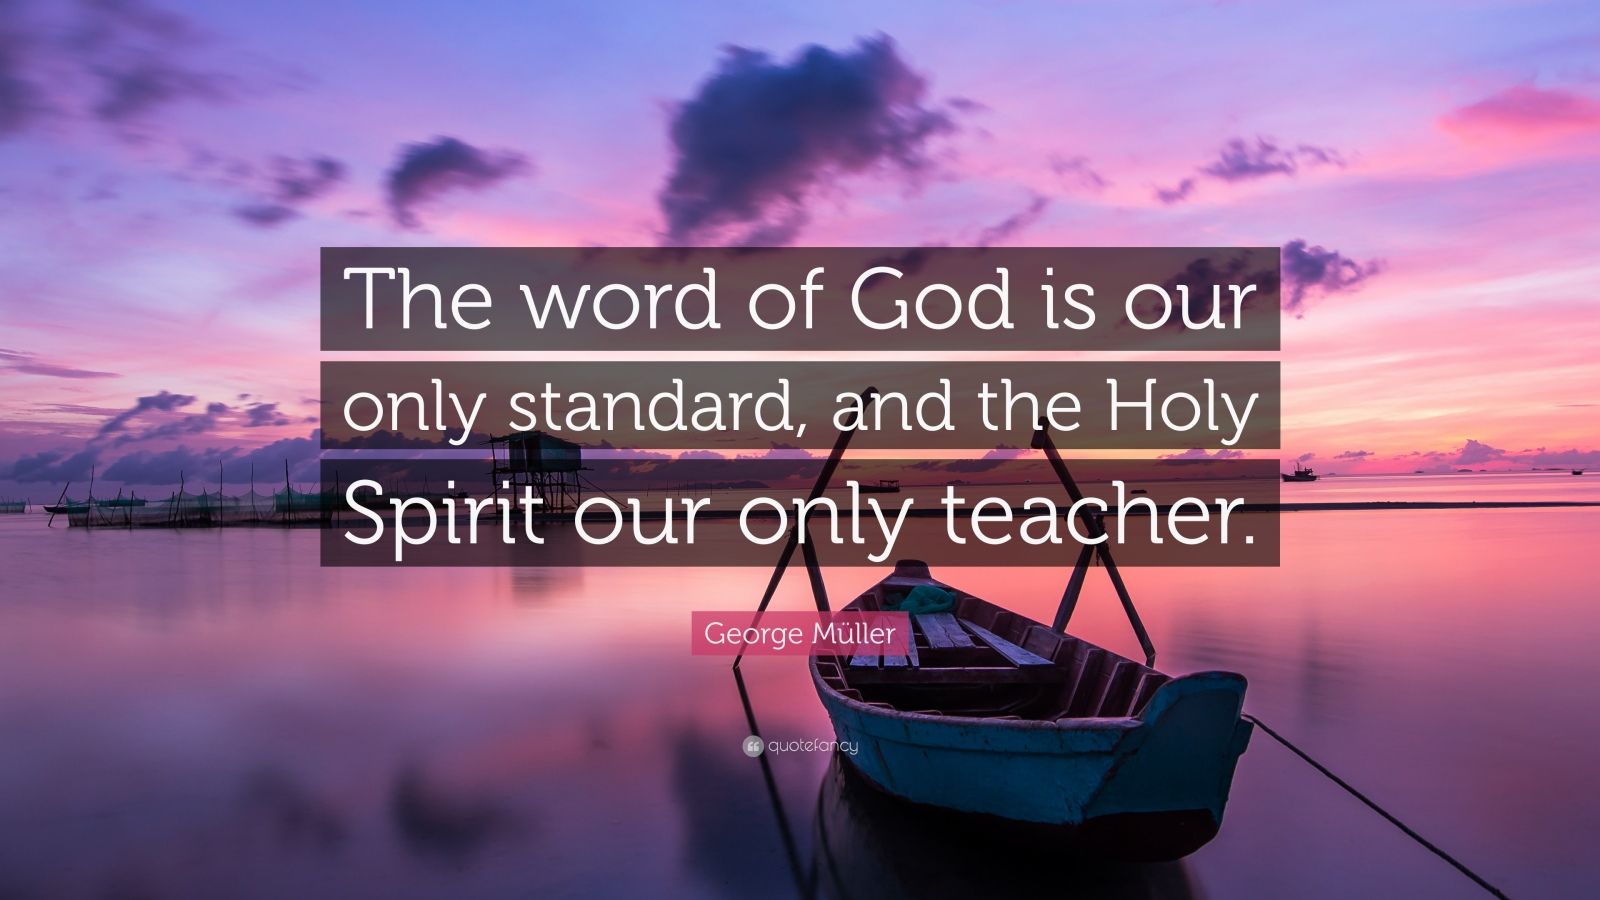 George Müller Quote: “The word of God is our only standard, and the ...